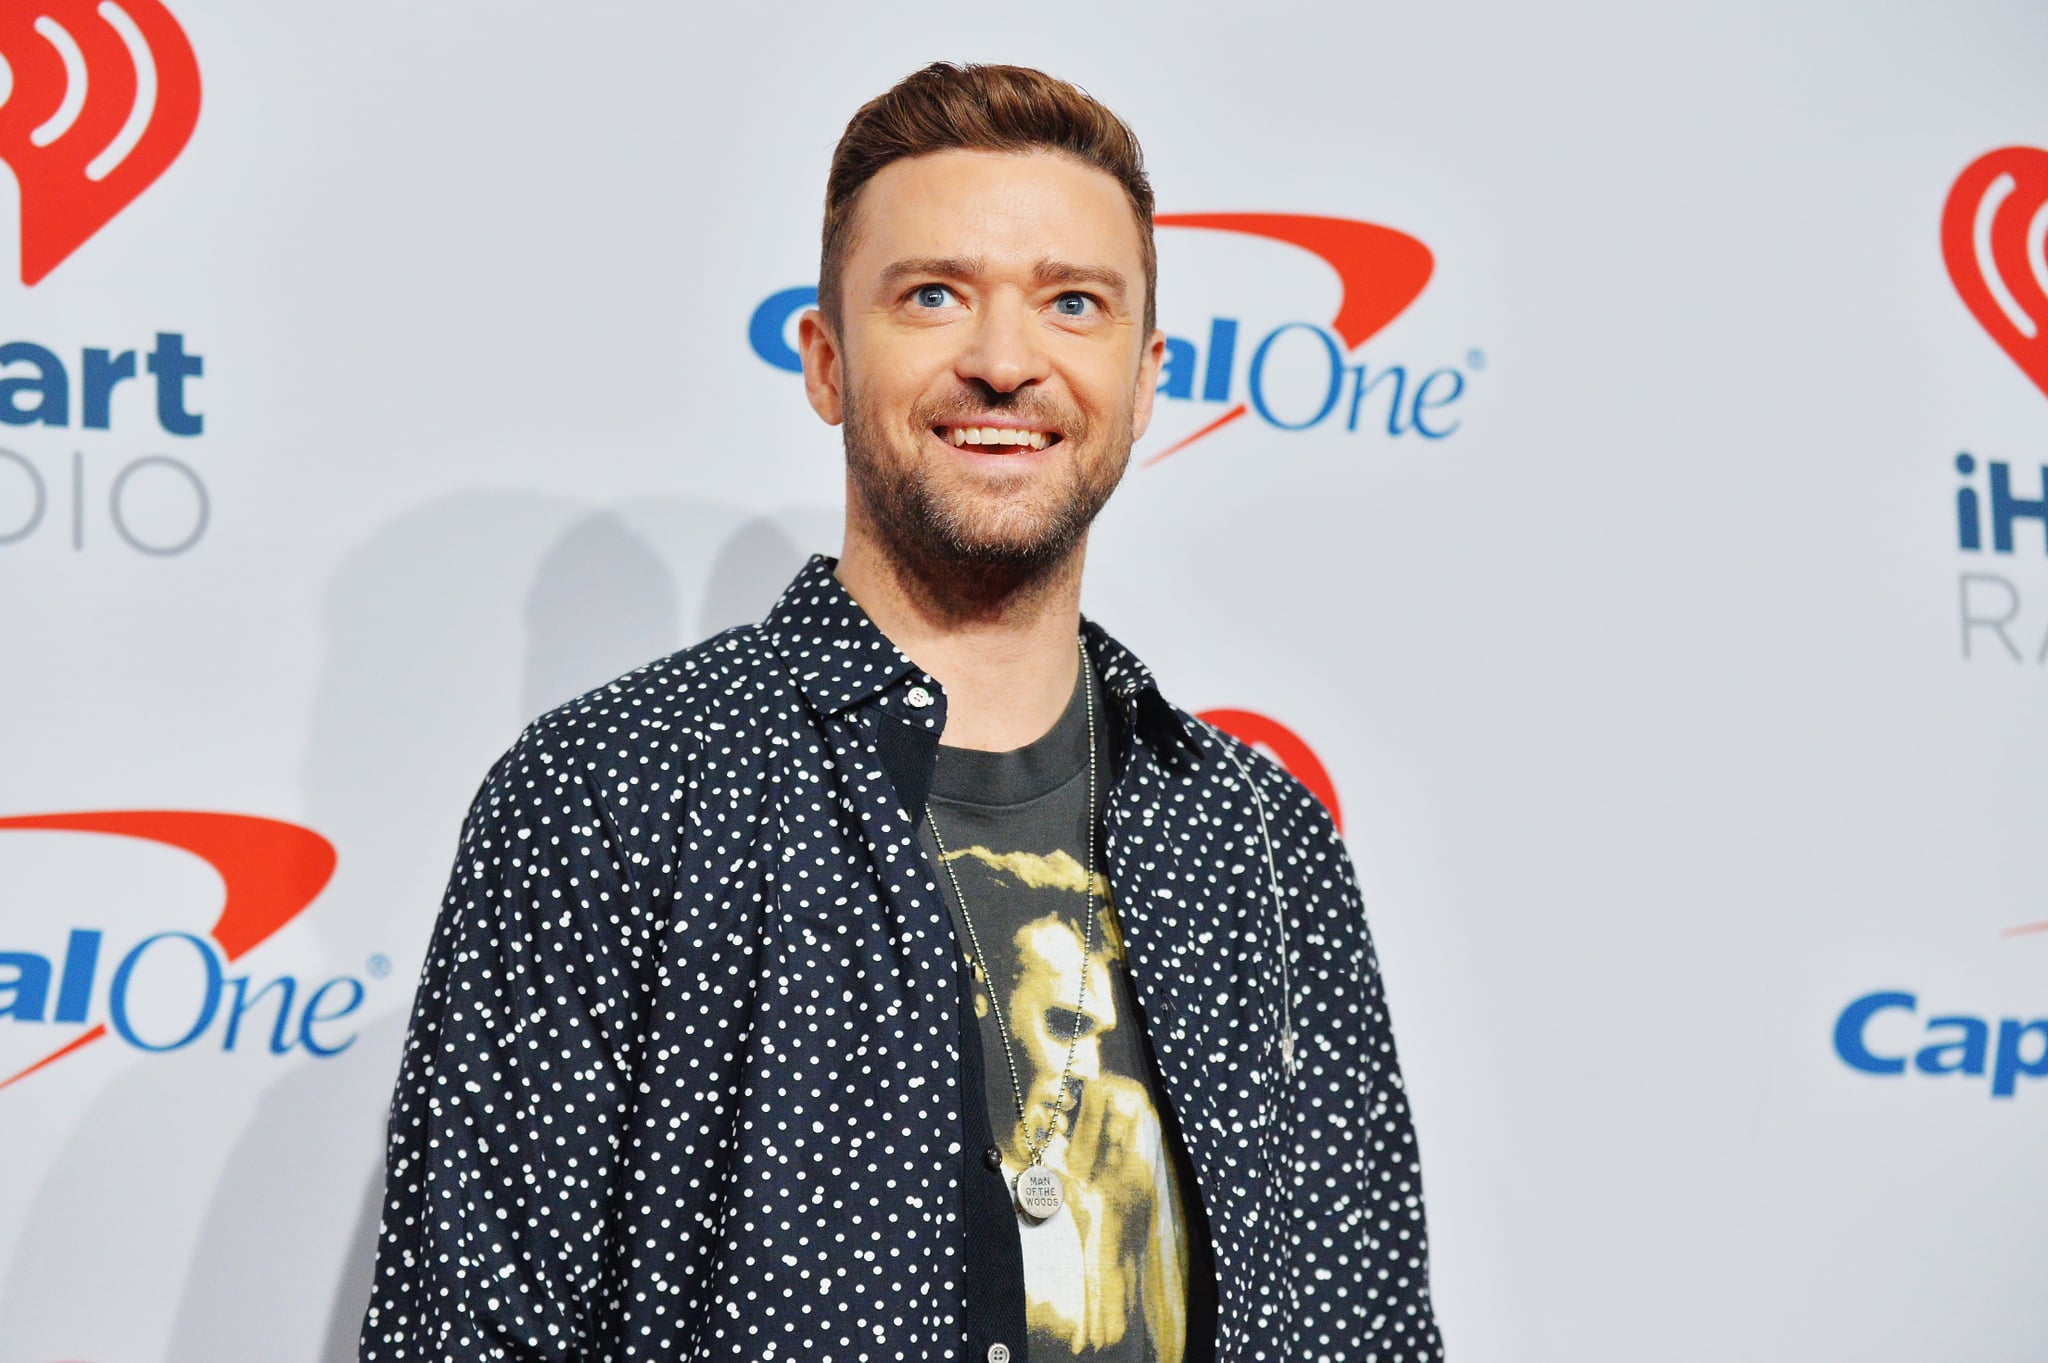 LAS VEGAS, NV - SEPTEMBER 22: (EDITORIAL USE ONLY; NO COMMERCIAL USE)  Justin Timberlake attends the iHeartRadio Music Festival at T-Mobile Arena on September 22, 2018 in Las Vegas, Nevada.  (Photo by Sam Wasson/Getty Images for iHeartMedia)